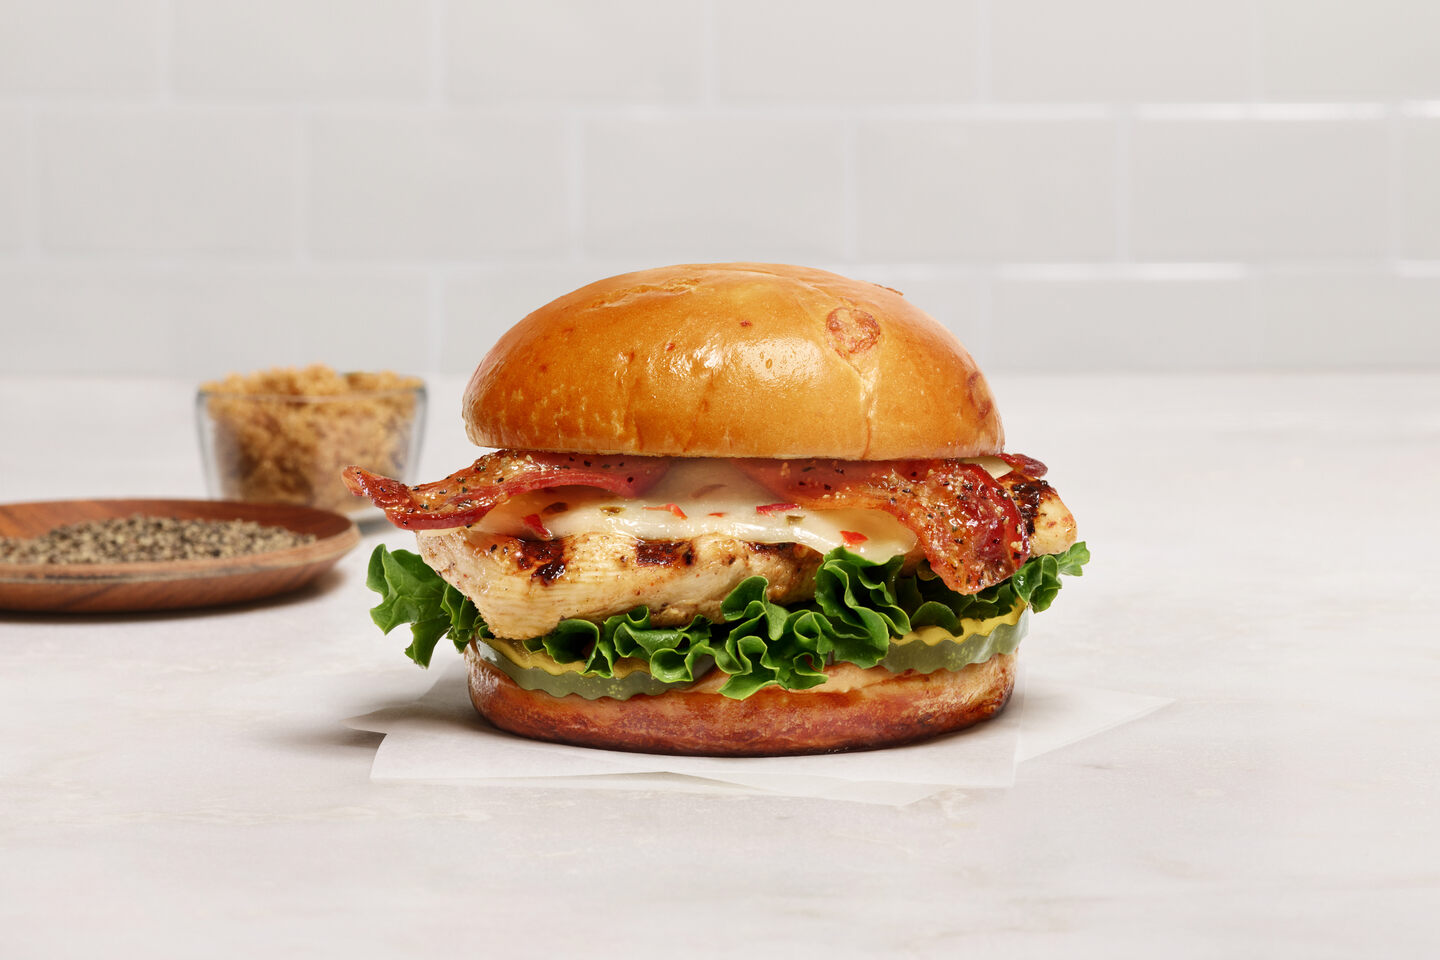 The new Chick-fil-A Maple Pepper Bacon Sandwich on a wooden countertop.